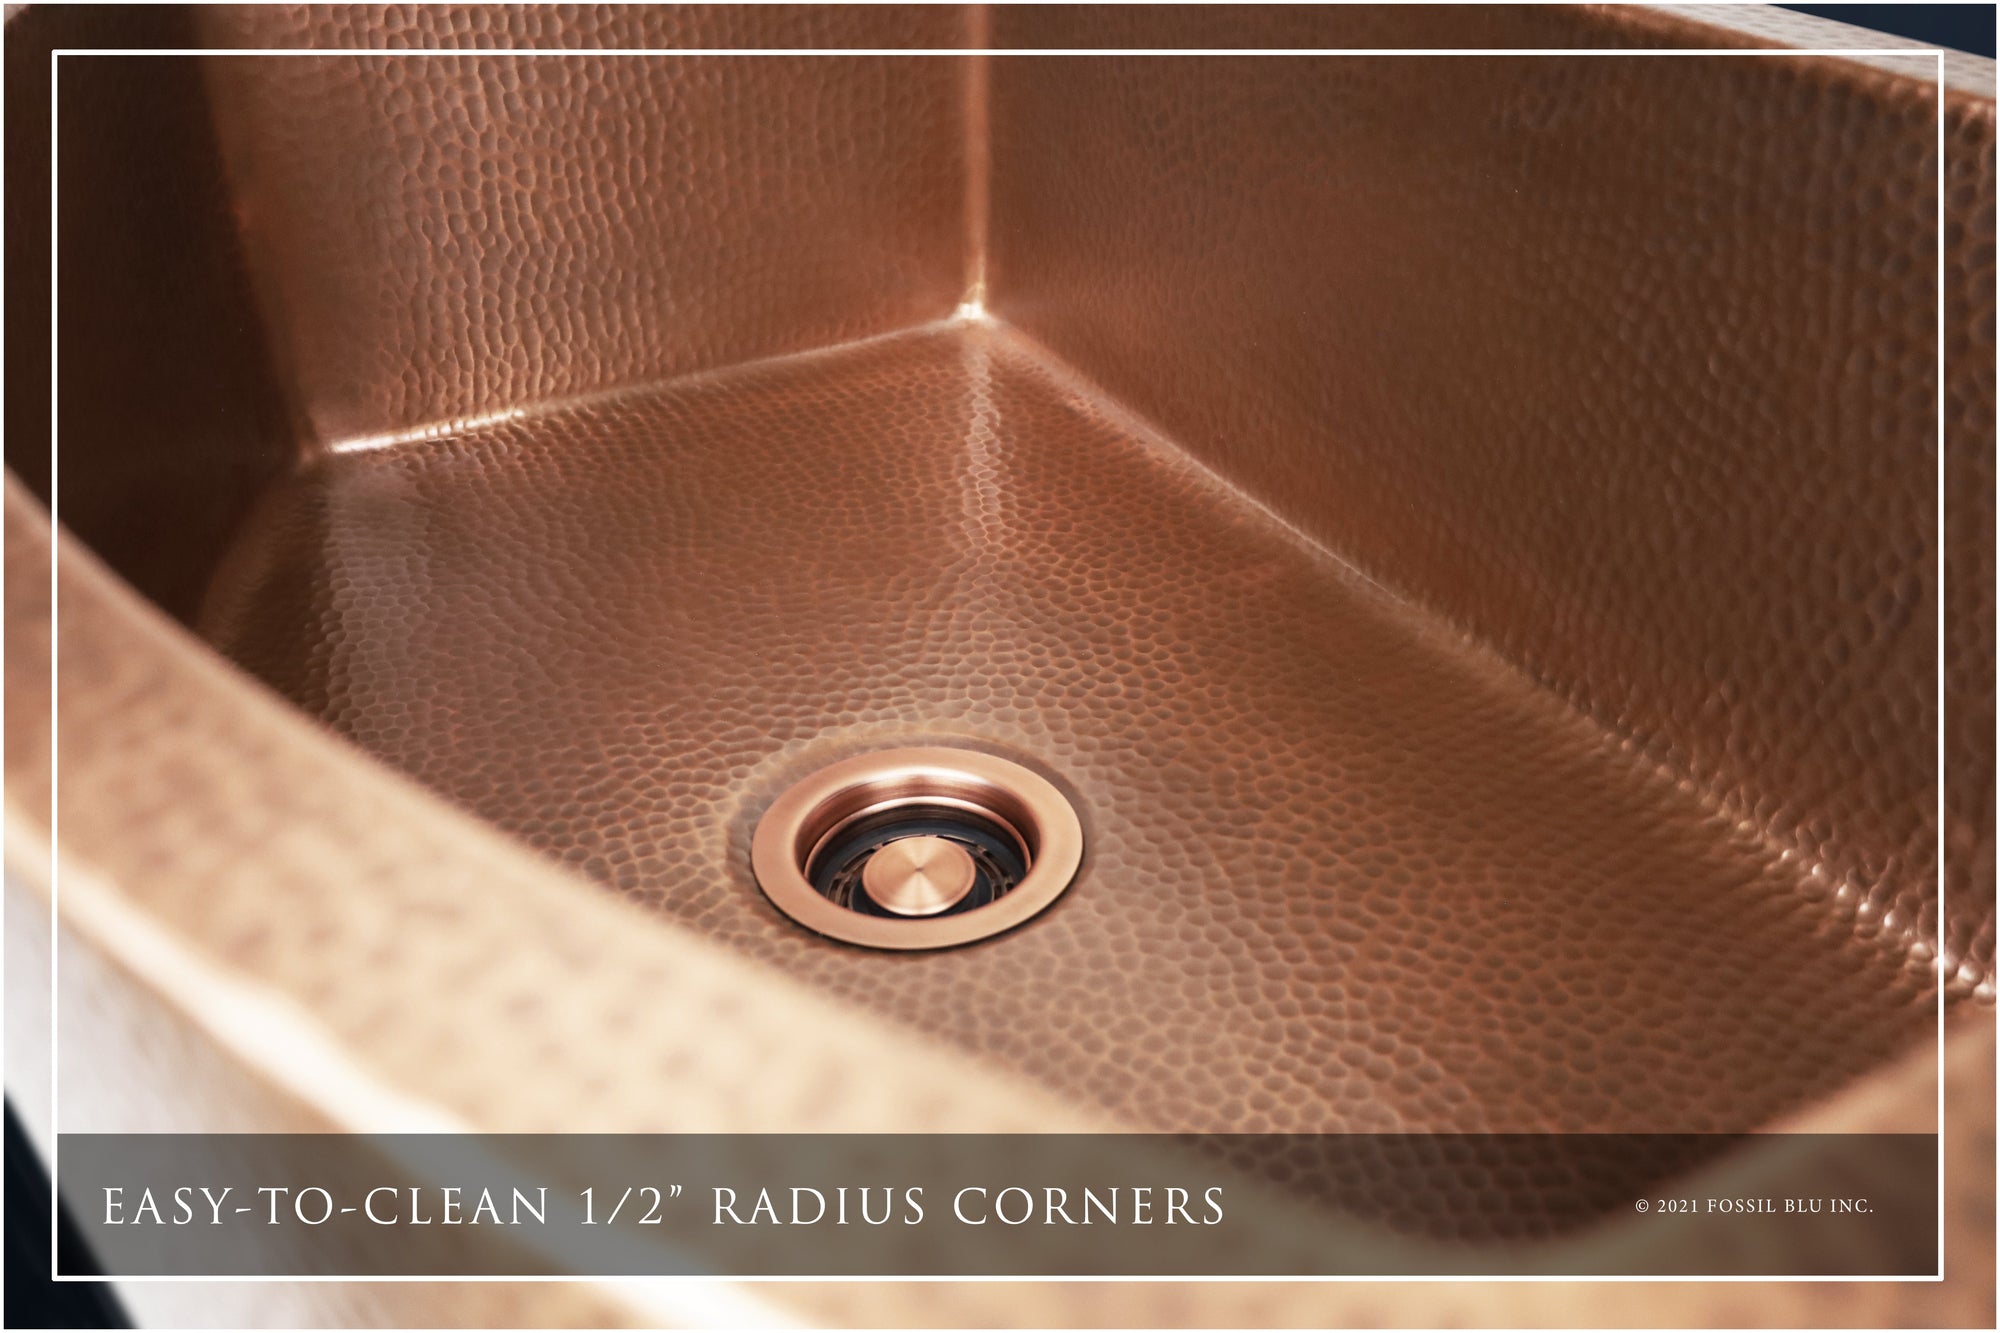 How to Clean Copper - Best Ways to Clean Copper Pans, Sink, Jewelry